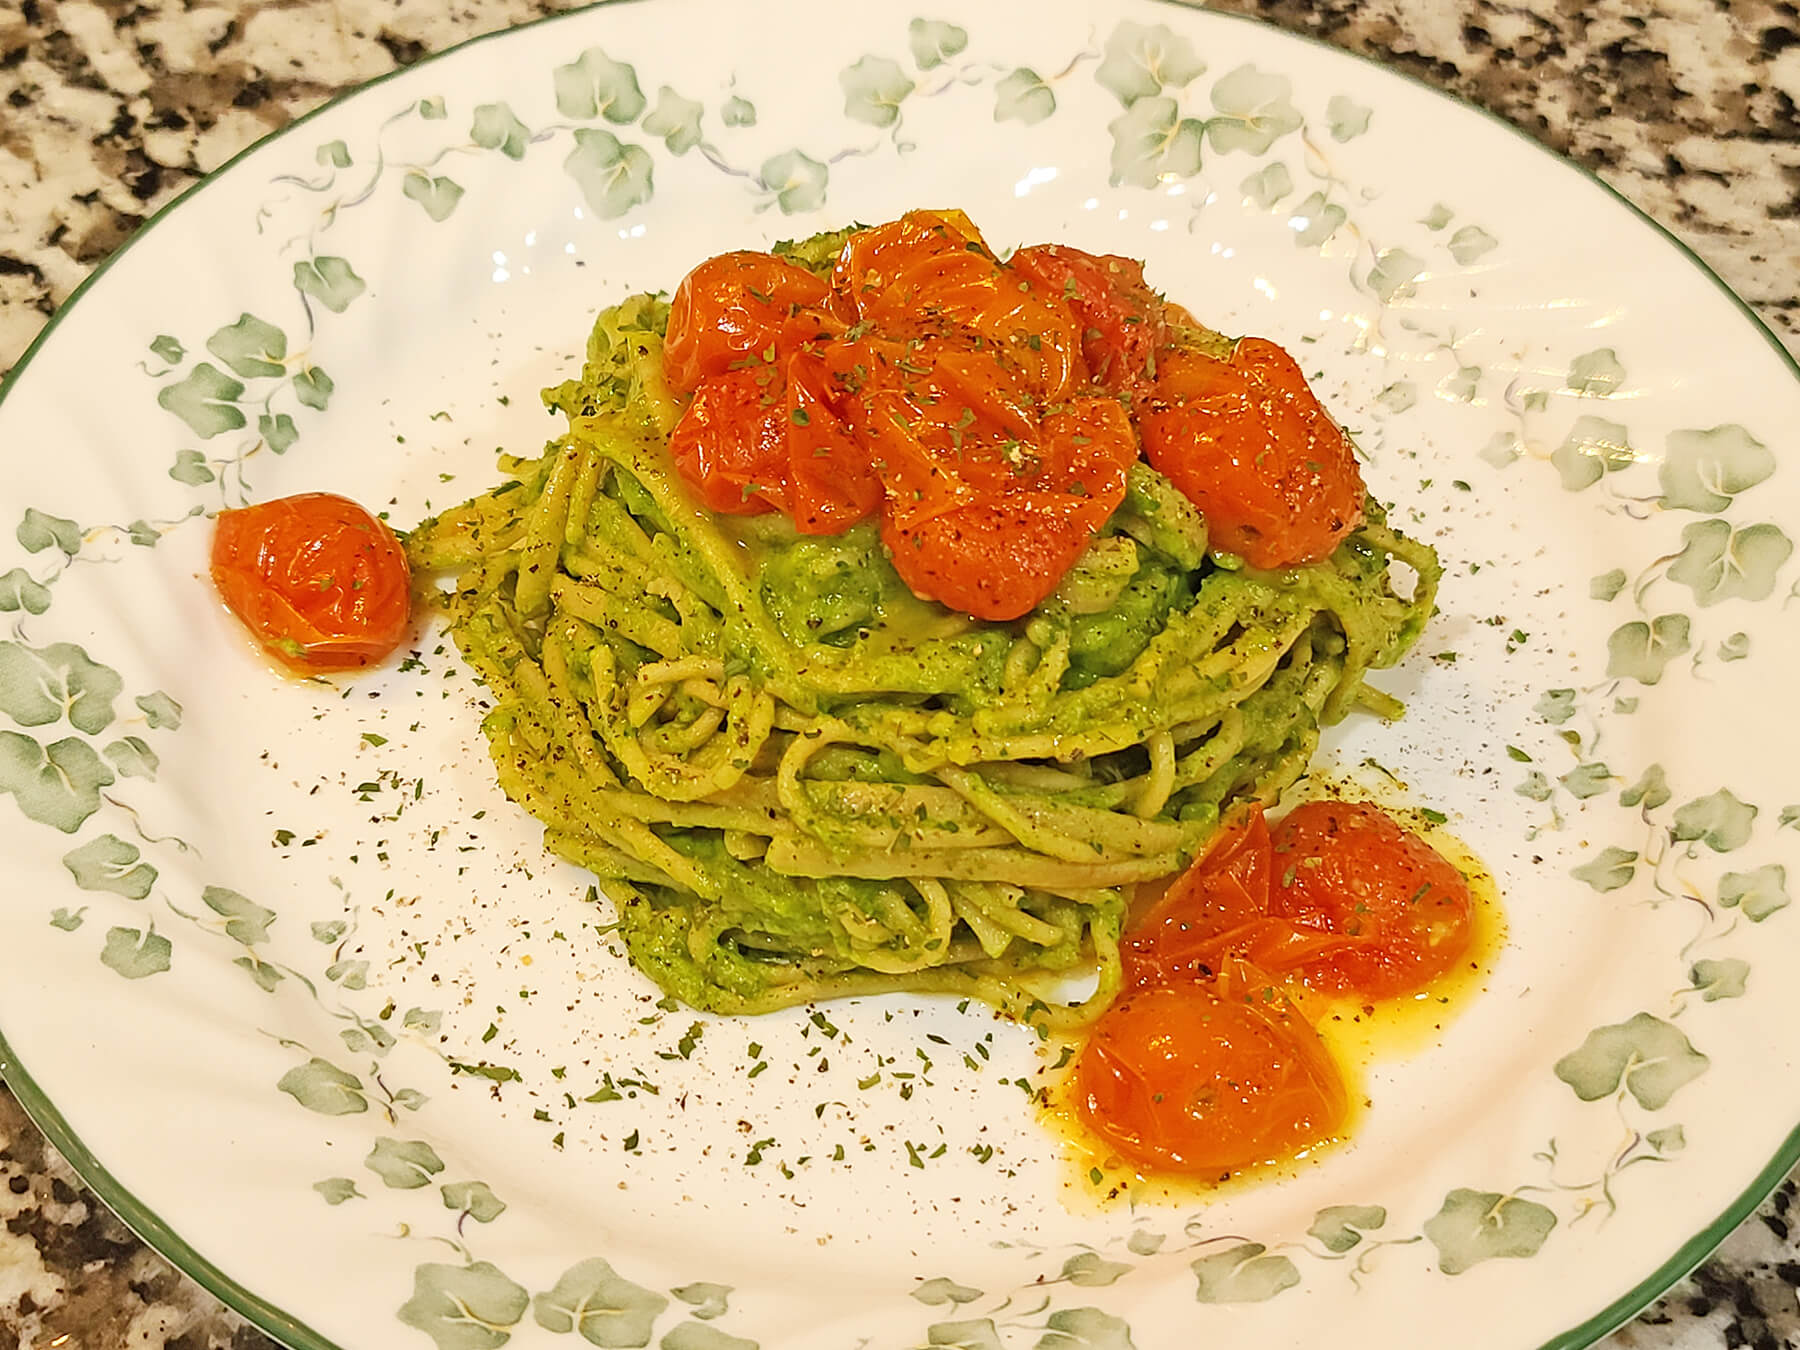 Explore new 'pasta'bilities with avocados - Spice Up Your Life